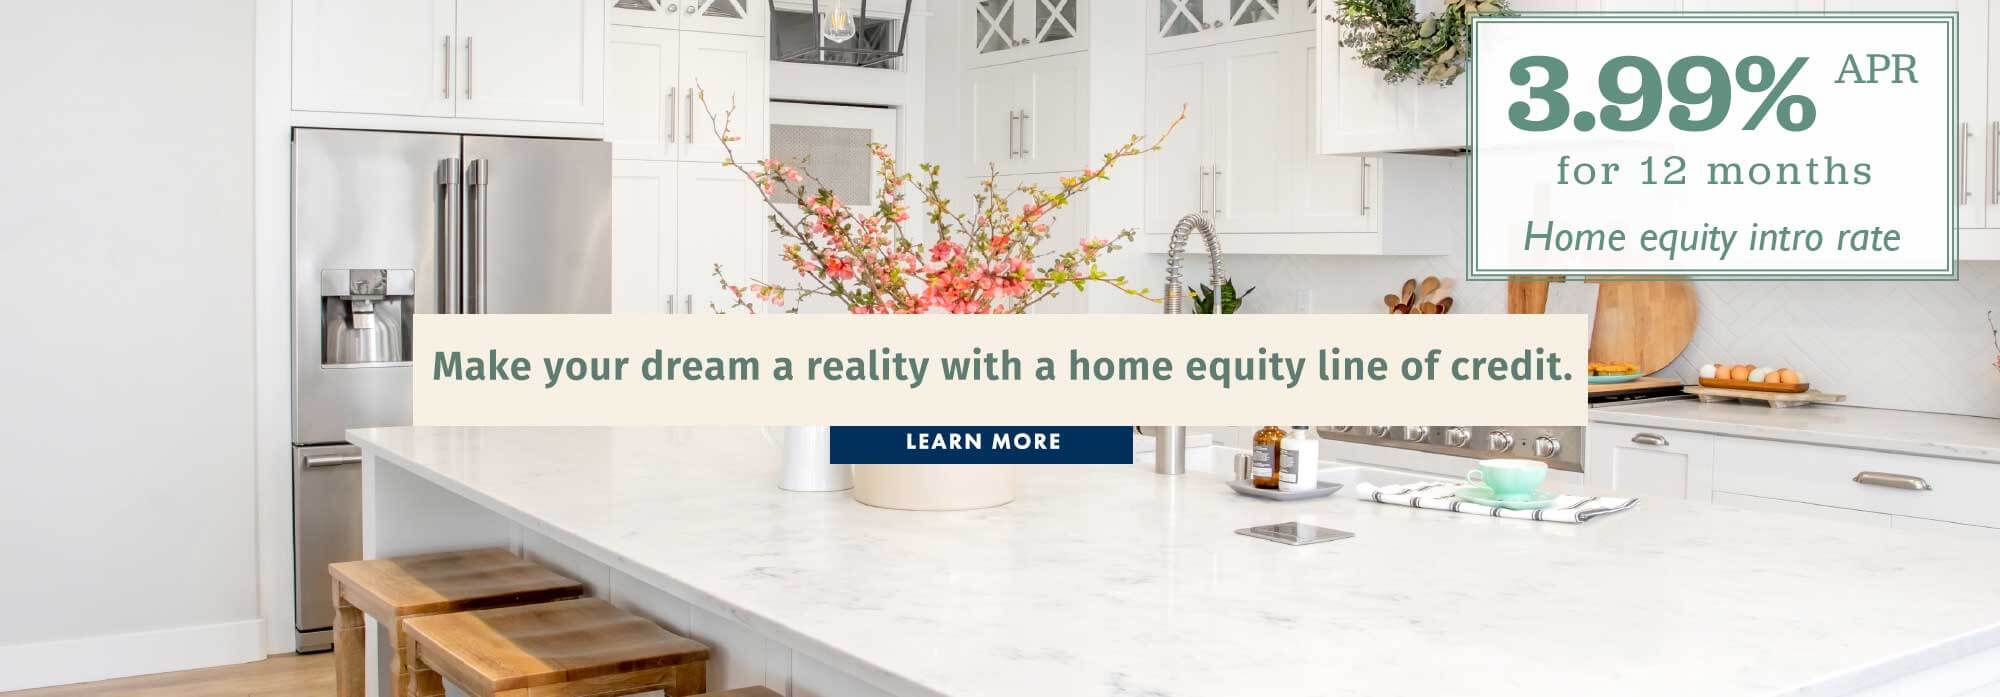 Make your dream a reality with a home equity line of credit.